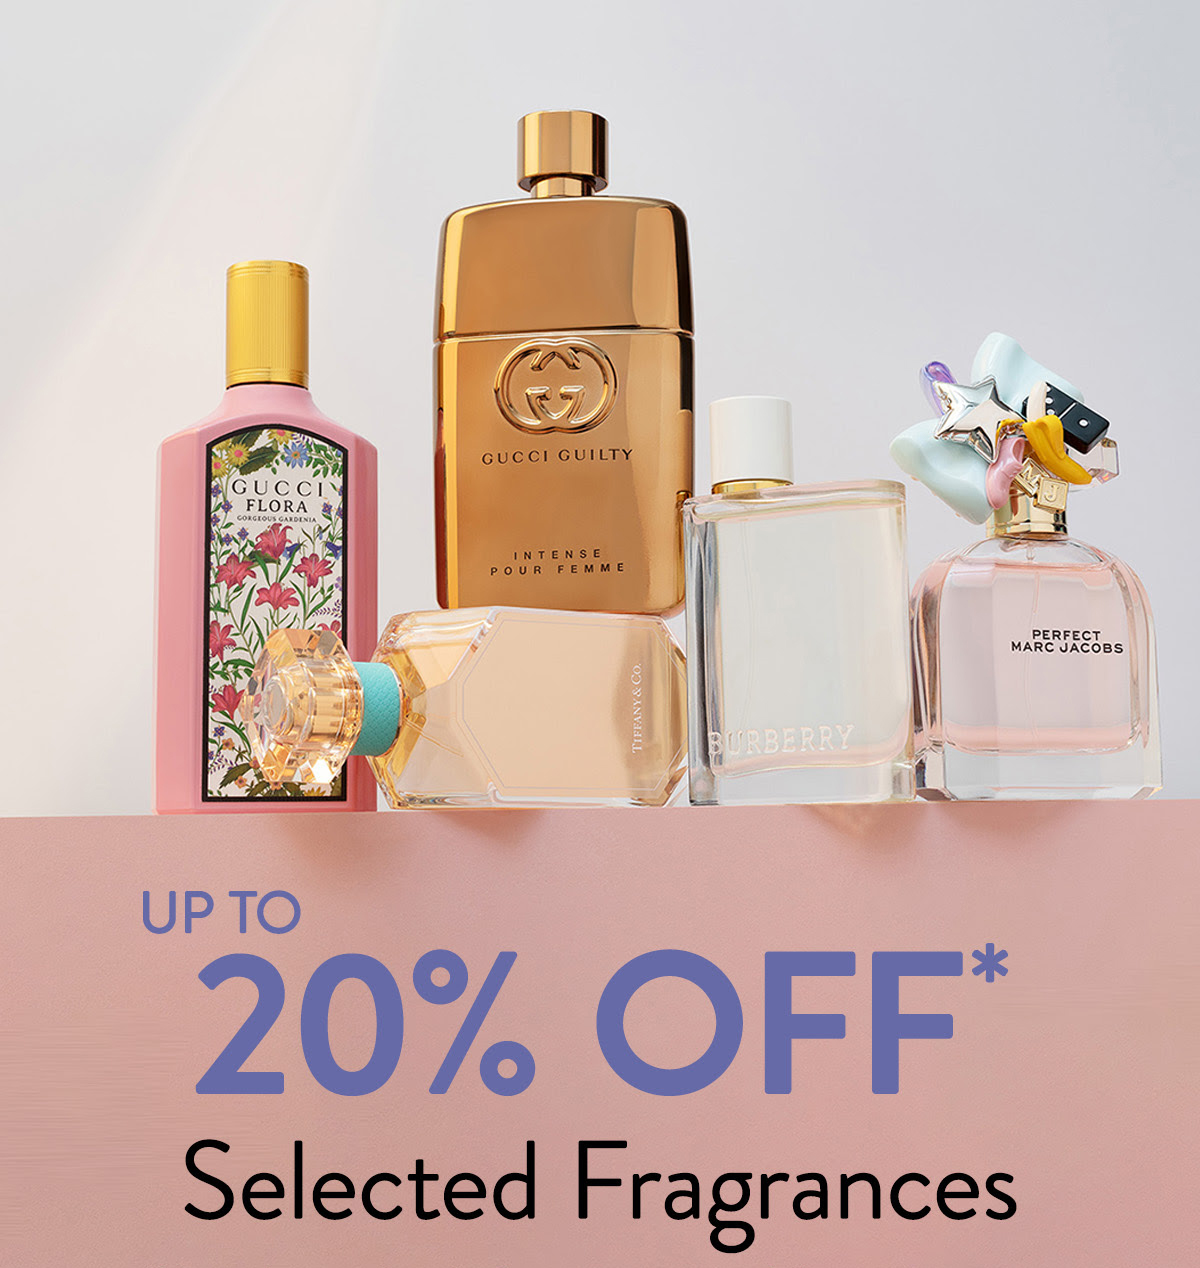 Up to 20% off selected Fragrance at Sephora UK